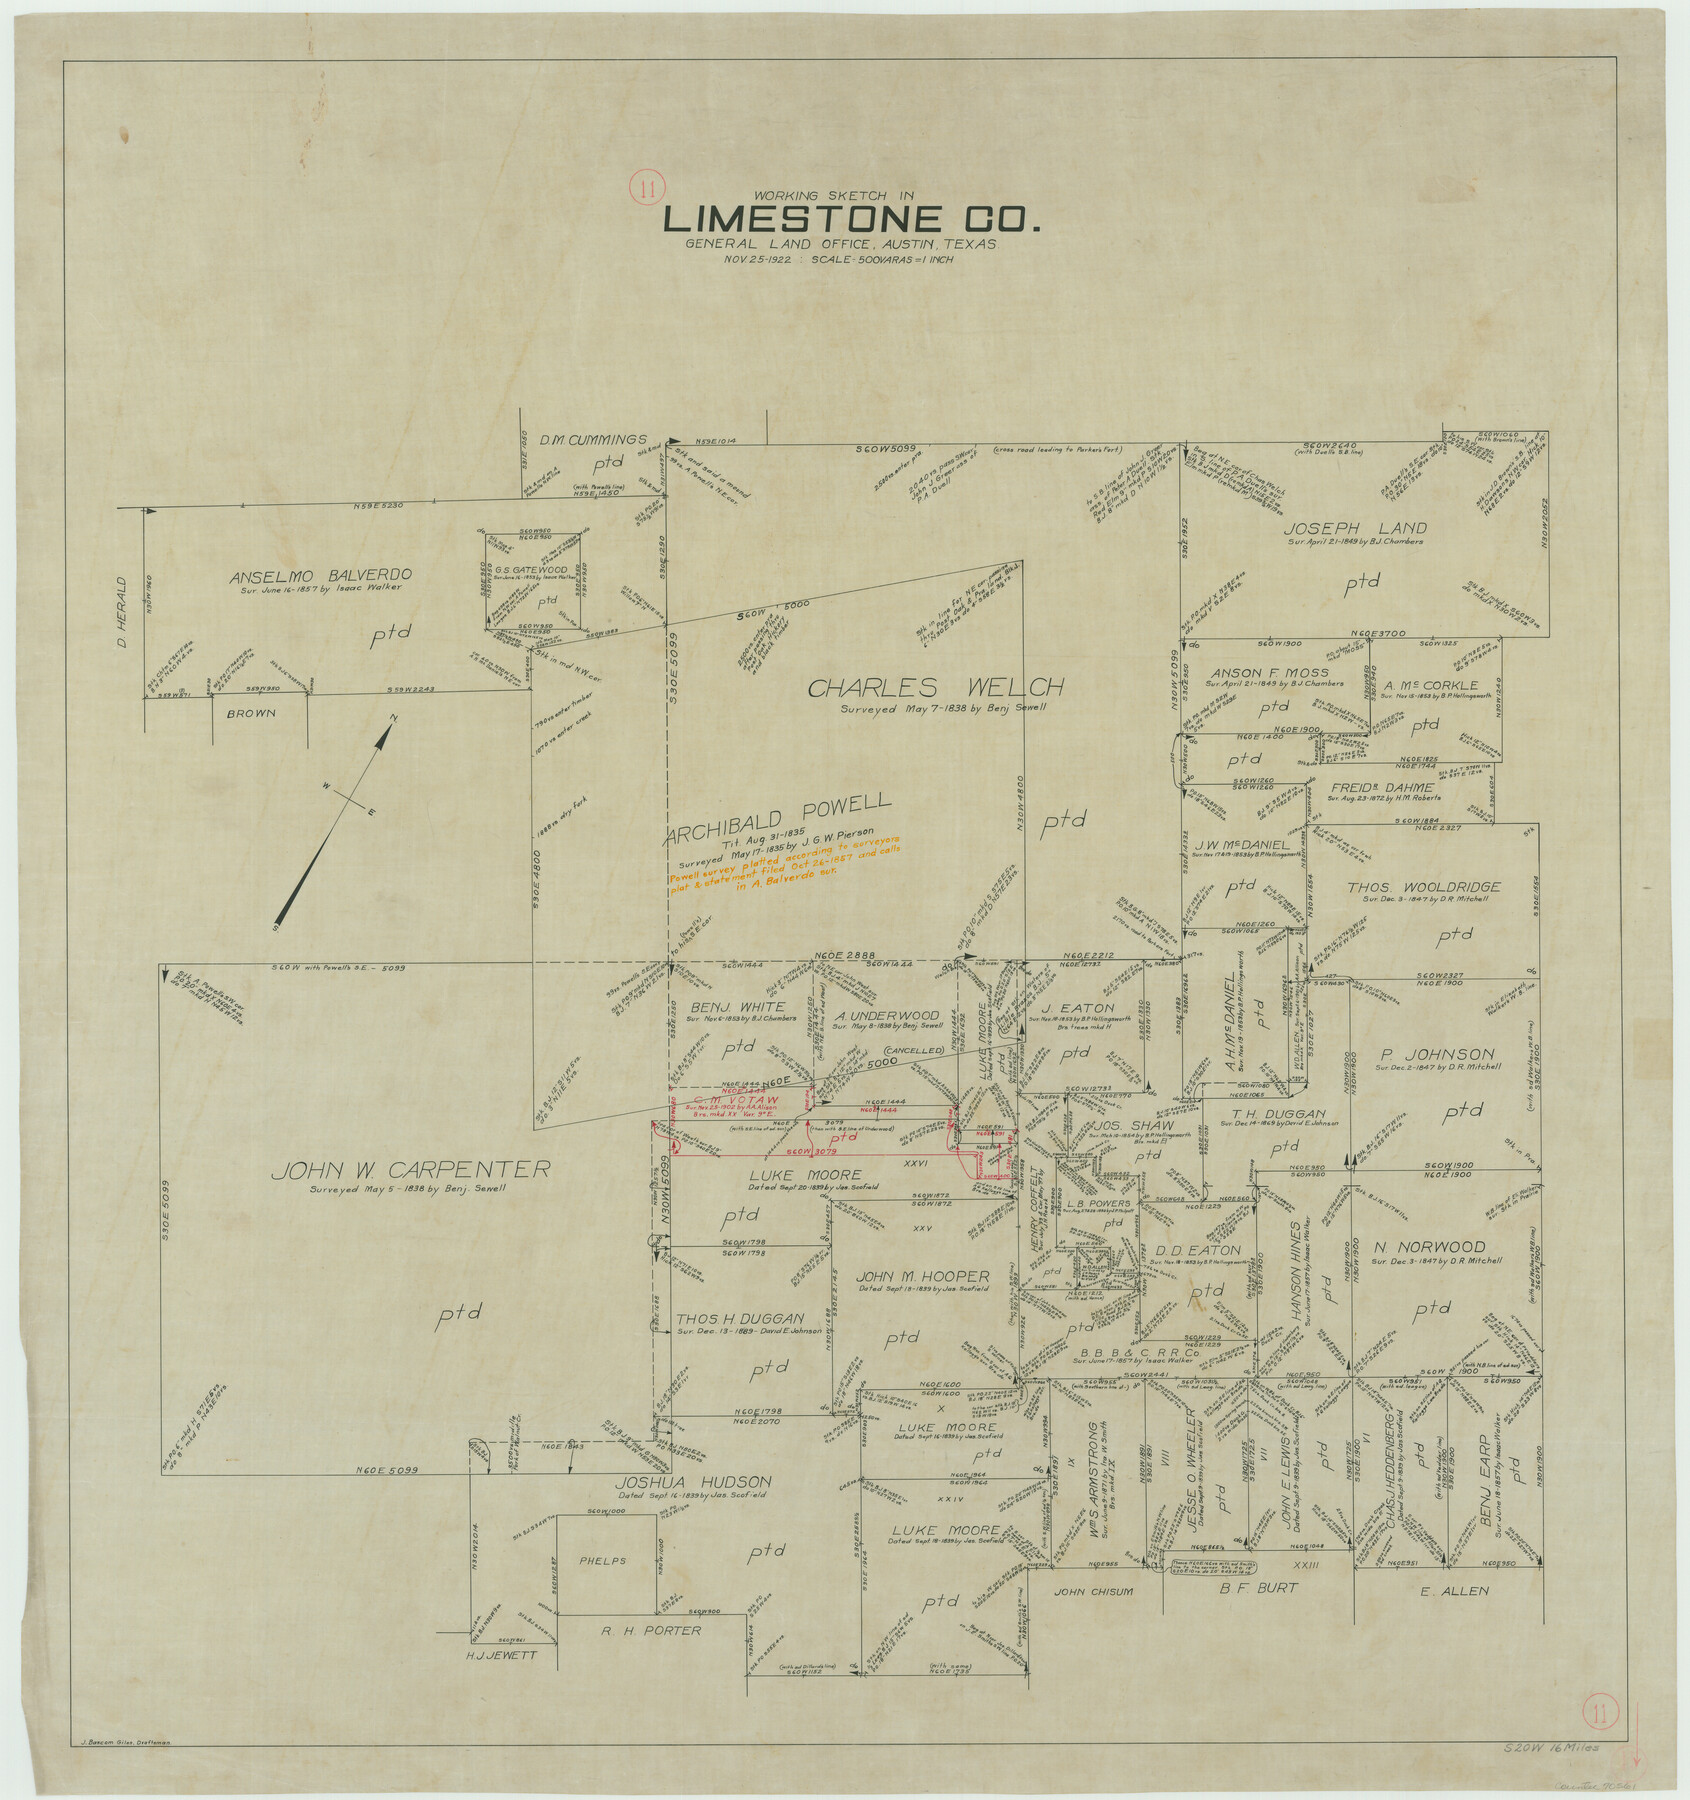 70561, Limestone County Working Sketch 11, General Map Collection